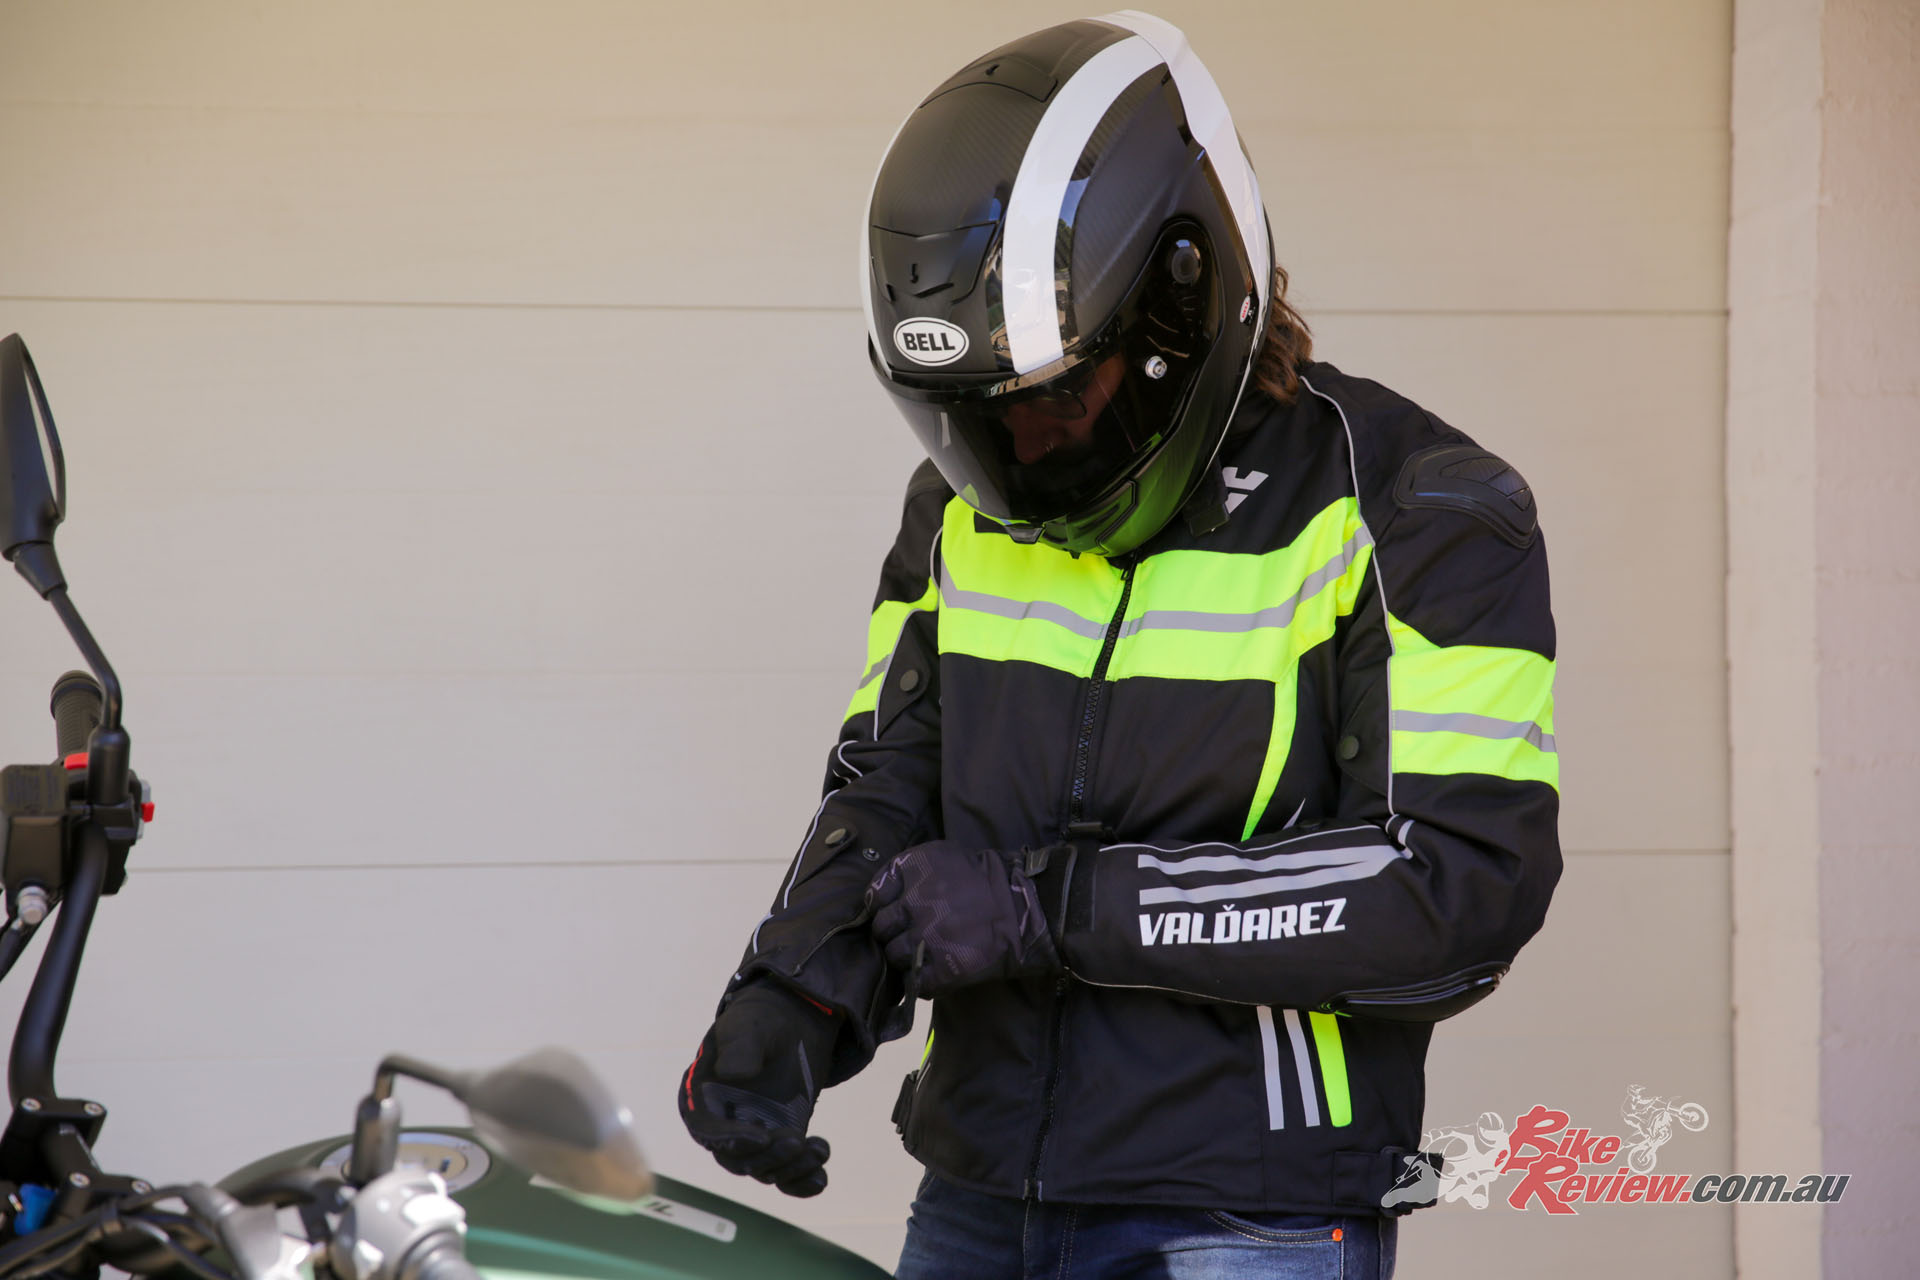 RSTG are an Aussie company located in Victoria, they describe themselves as "a small dedicated team of rider nuts specialising in safety gear for motorcycle riders."